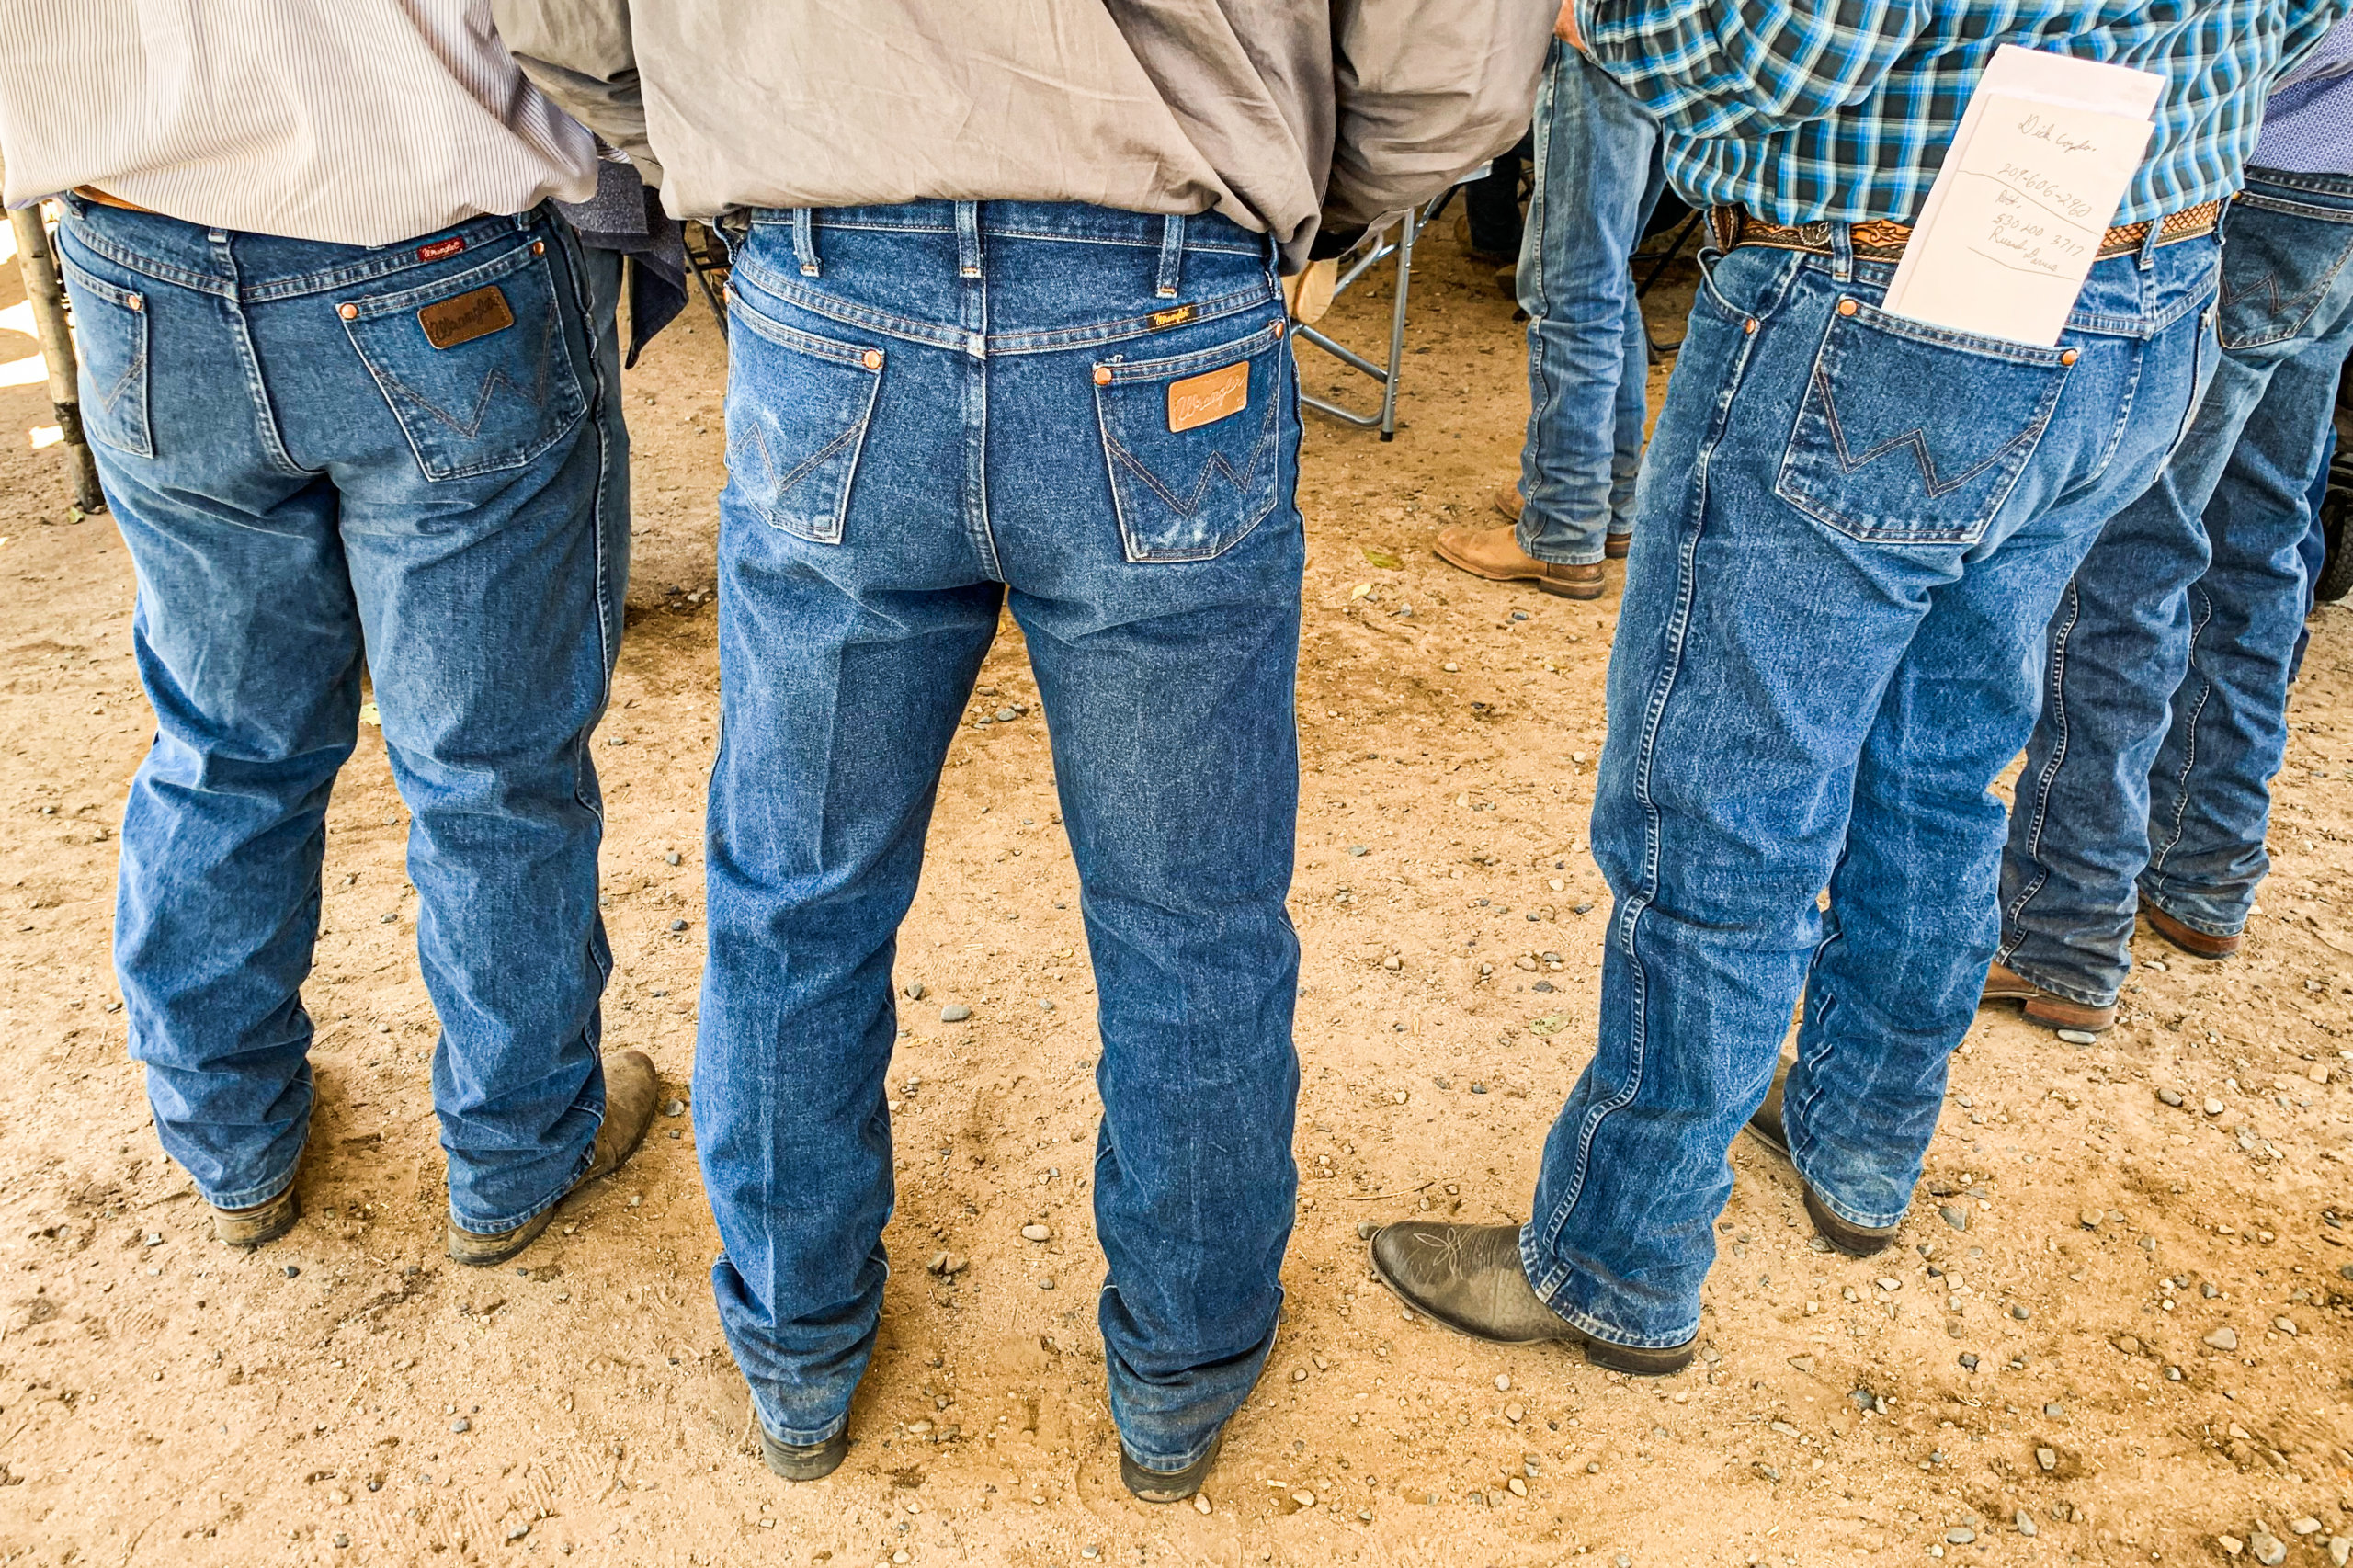 A group of men wearing plaid shirts tucked into Wrangler jeans